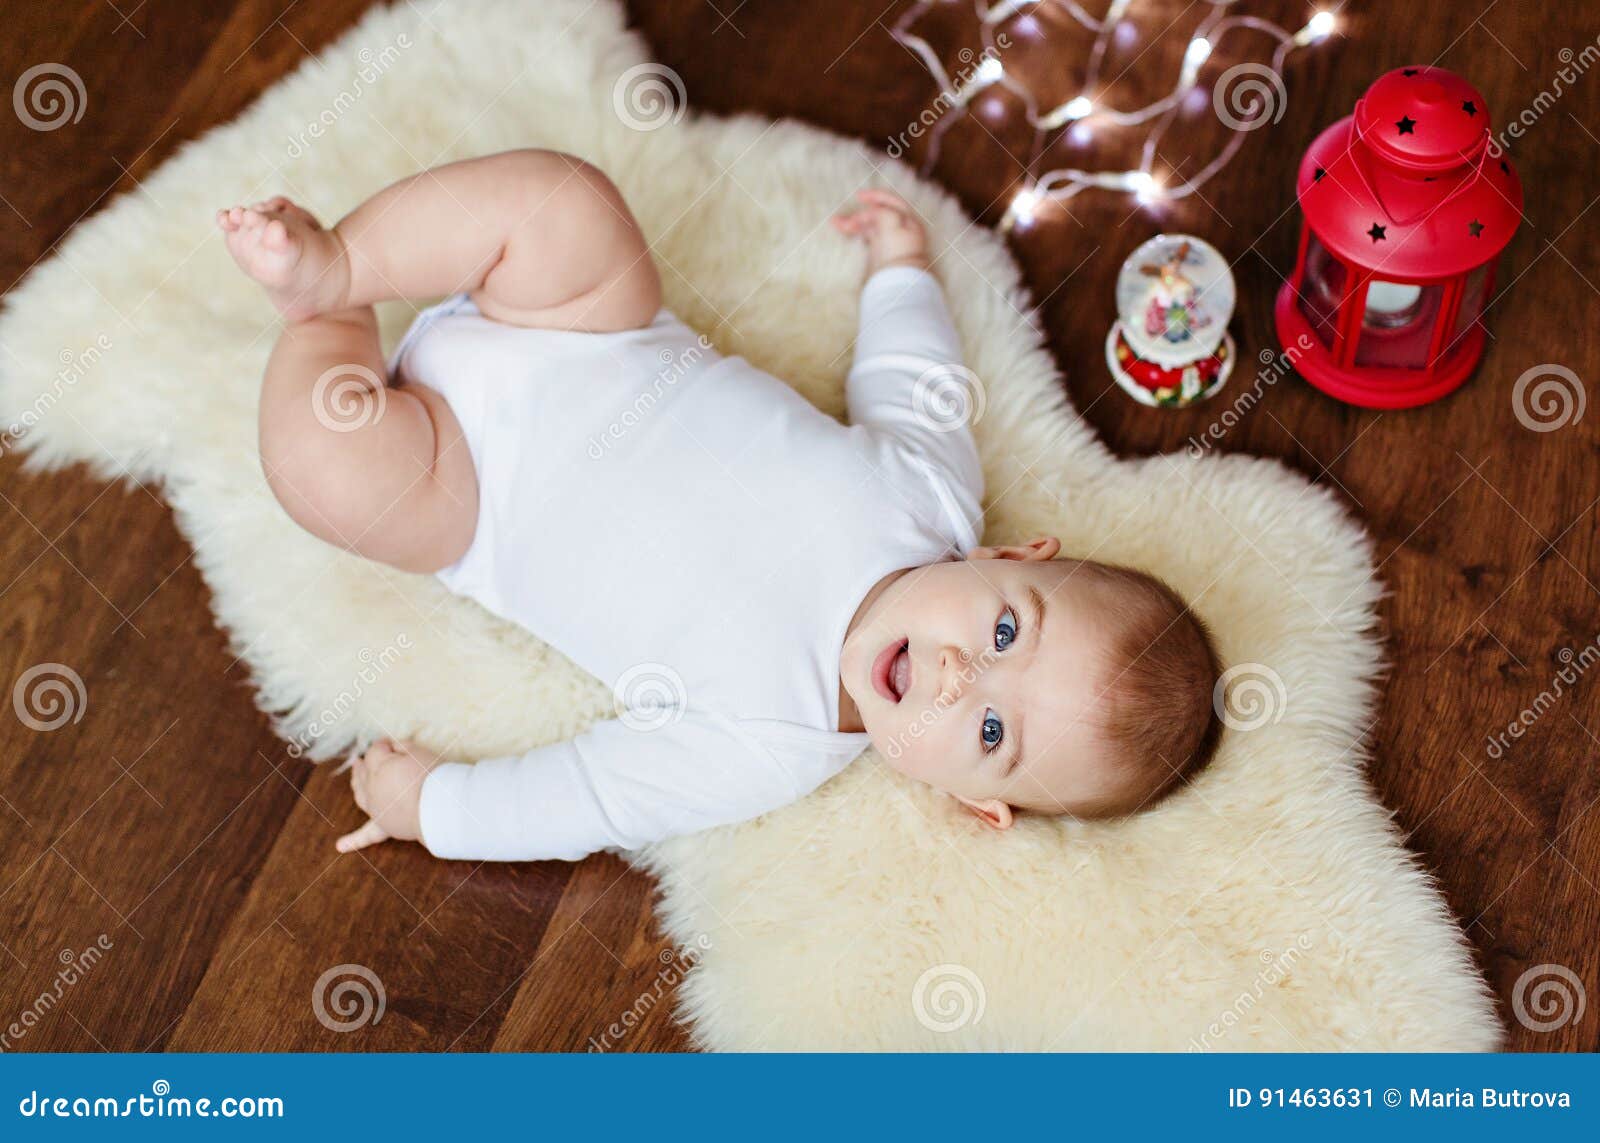 Small Very Cute Baby Lying on the White Skin of the Background L ...